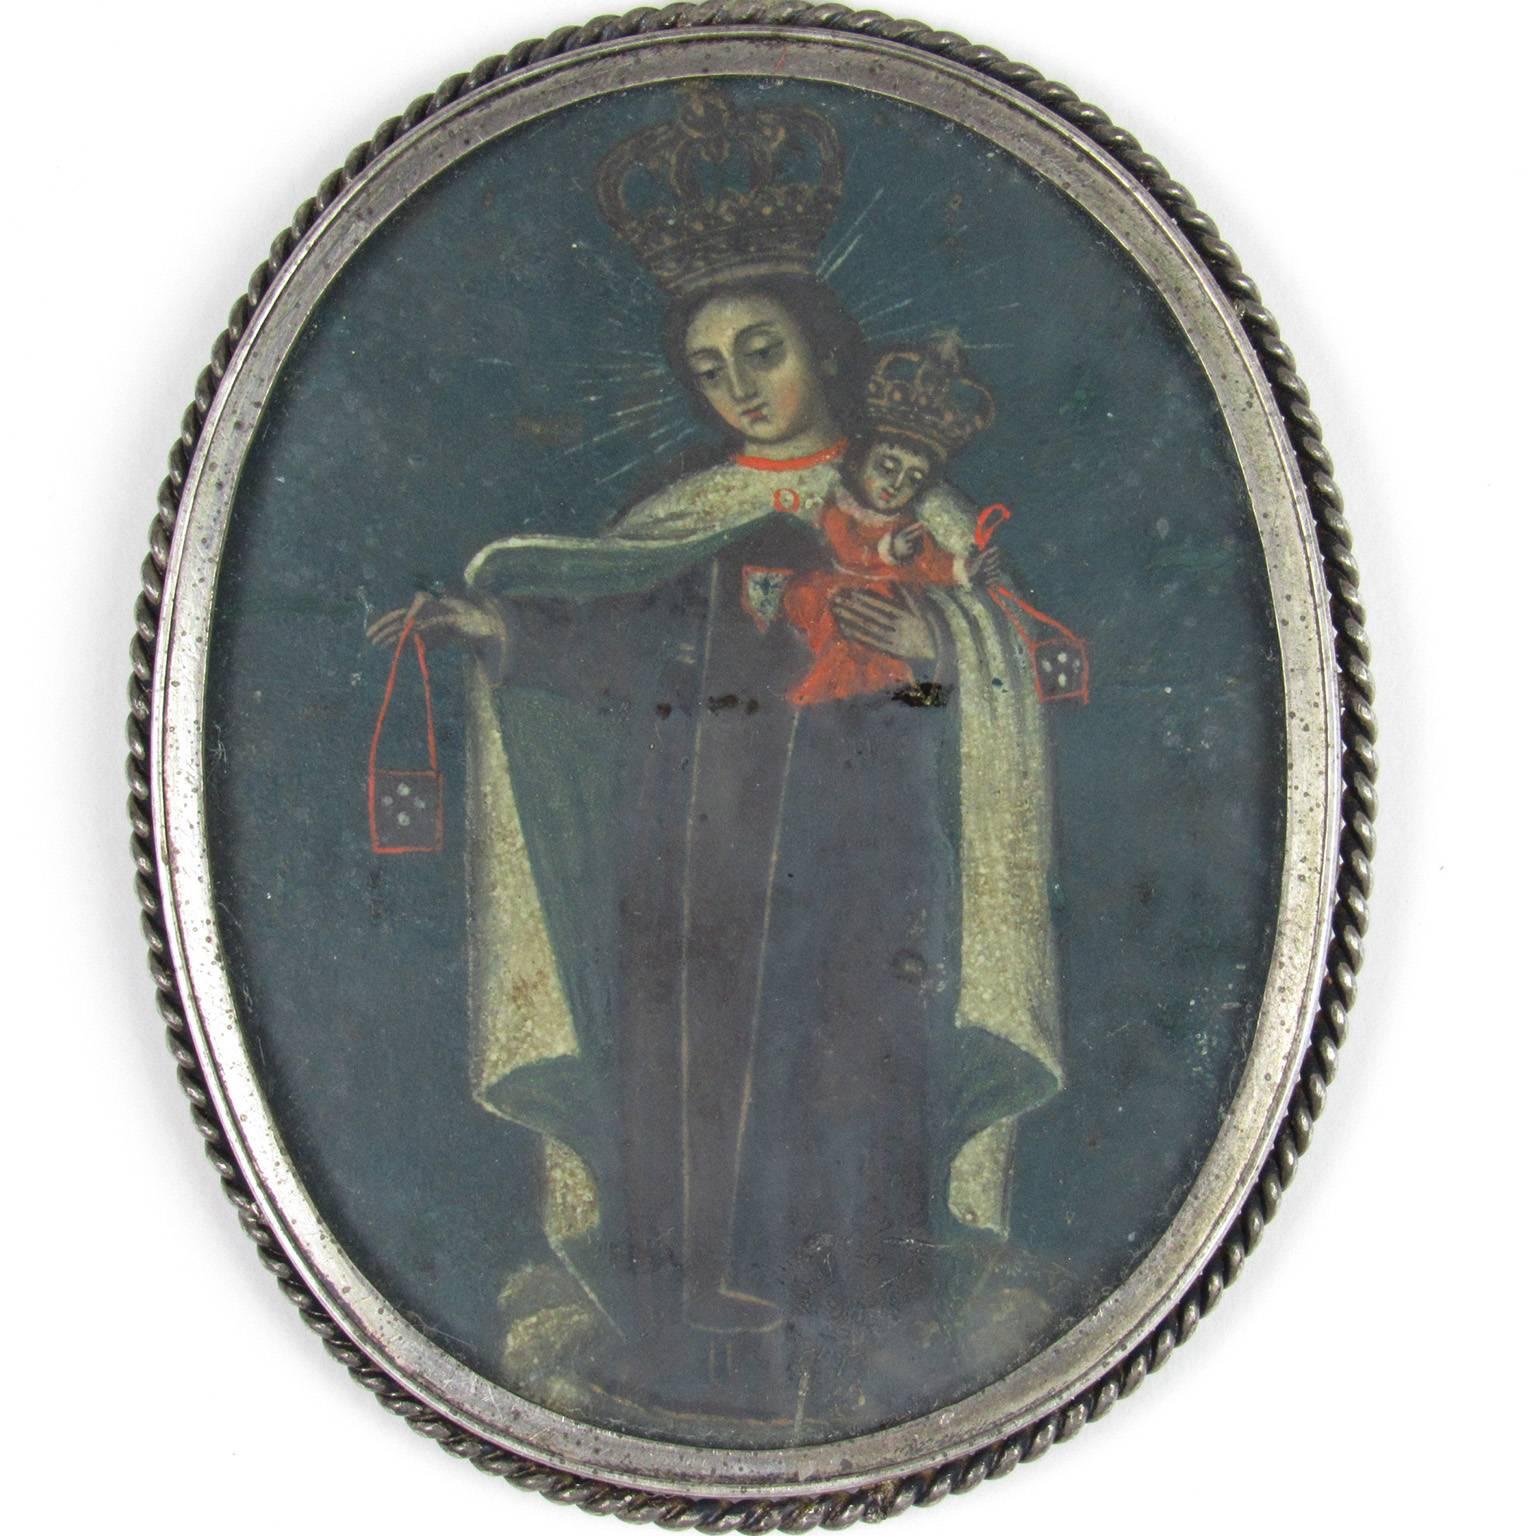 Rare early 19th century Spanish Colonial Two-Sided Reliquary, depicting the Madonna and Child on both sides.  One side features a figure of a man kneeling in prayer to Mary, Queen of Heaven.  Inscribed "A de Voci Mariane...Pe..."  lower